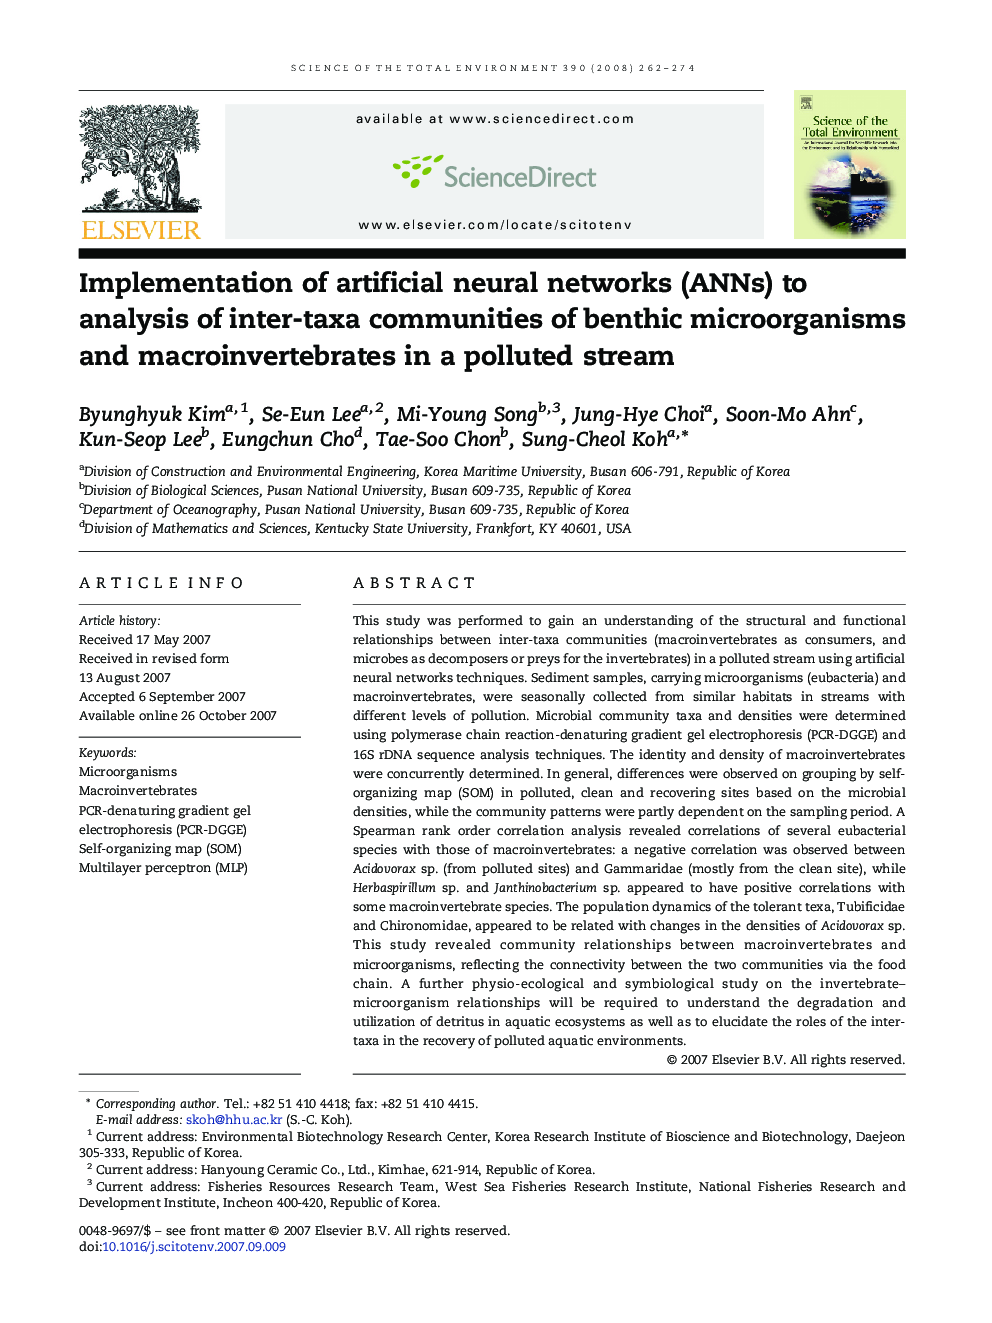 Implementation of artificial neural networks (ANNs) to analysis of inter-taxa communities of benthic microorganisms and macroinvertebrates in a polluted stream